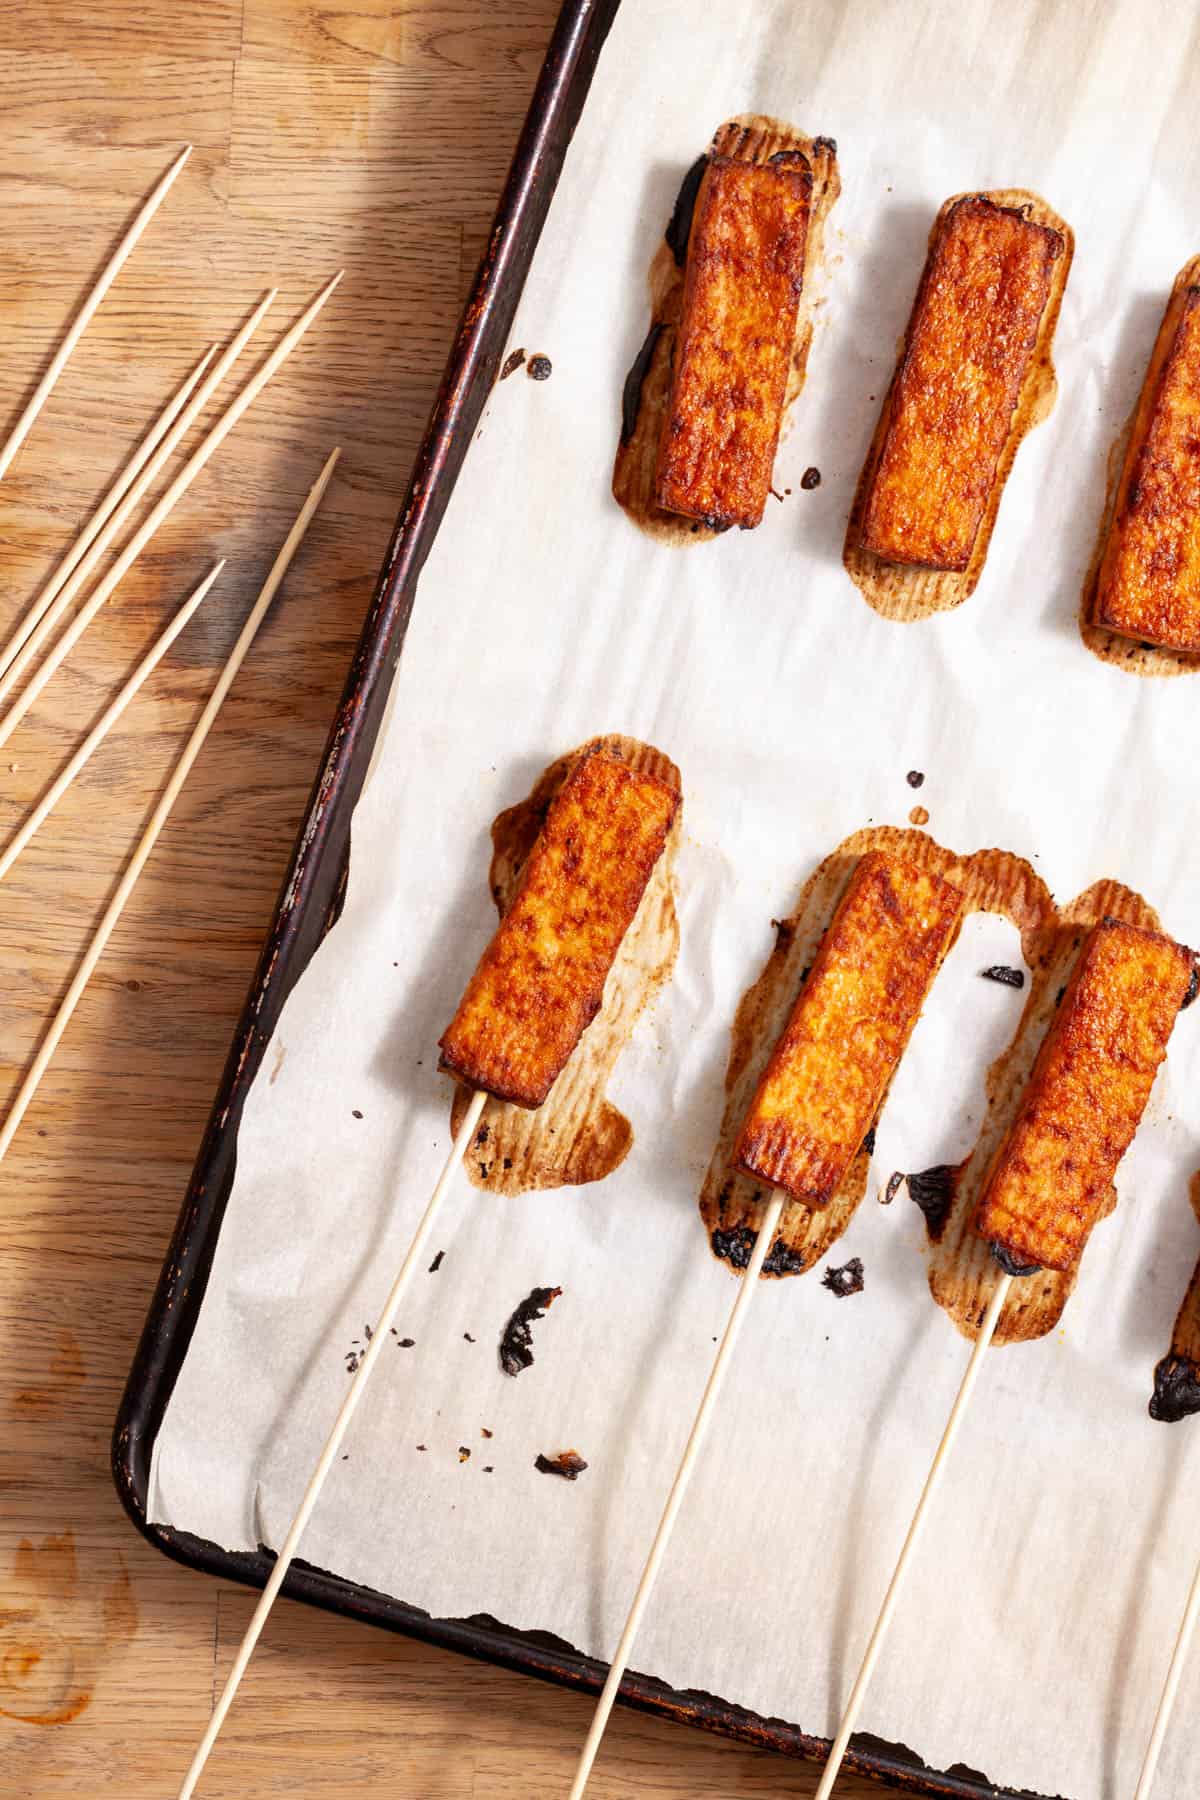 Skewers pressed into strips of tofu satay on a parchment-lined baking sheet.